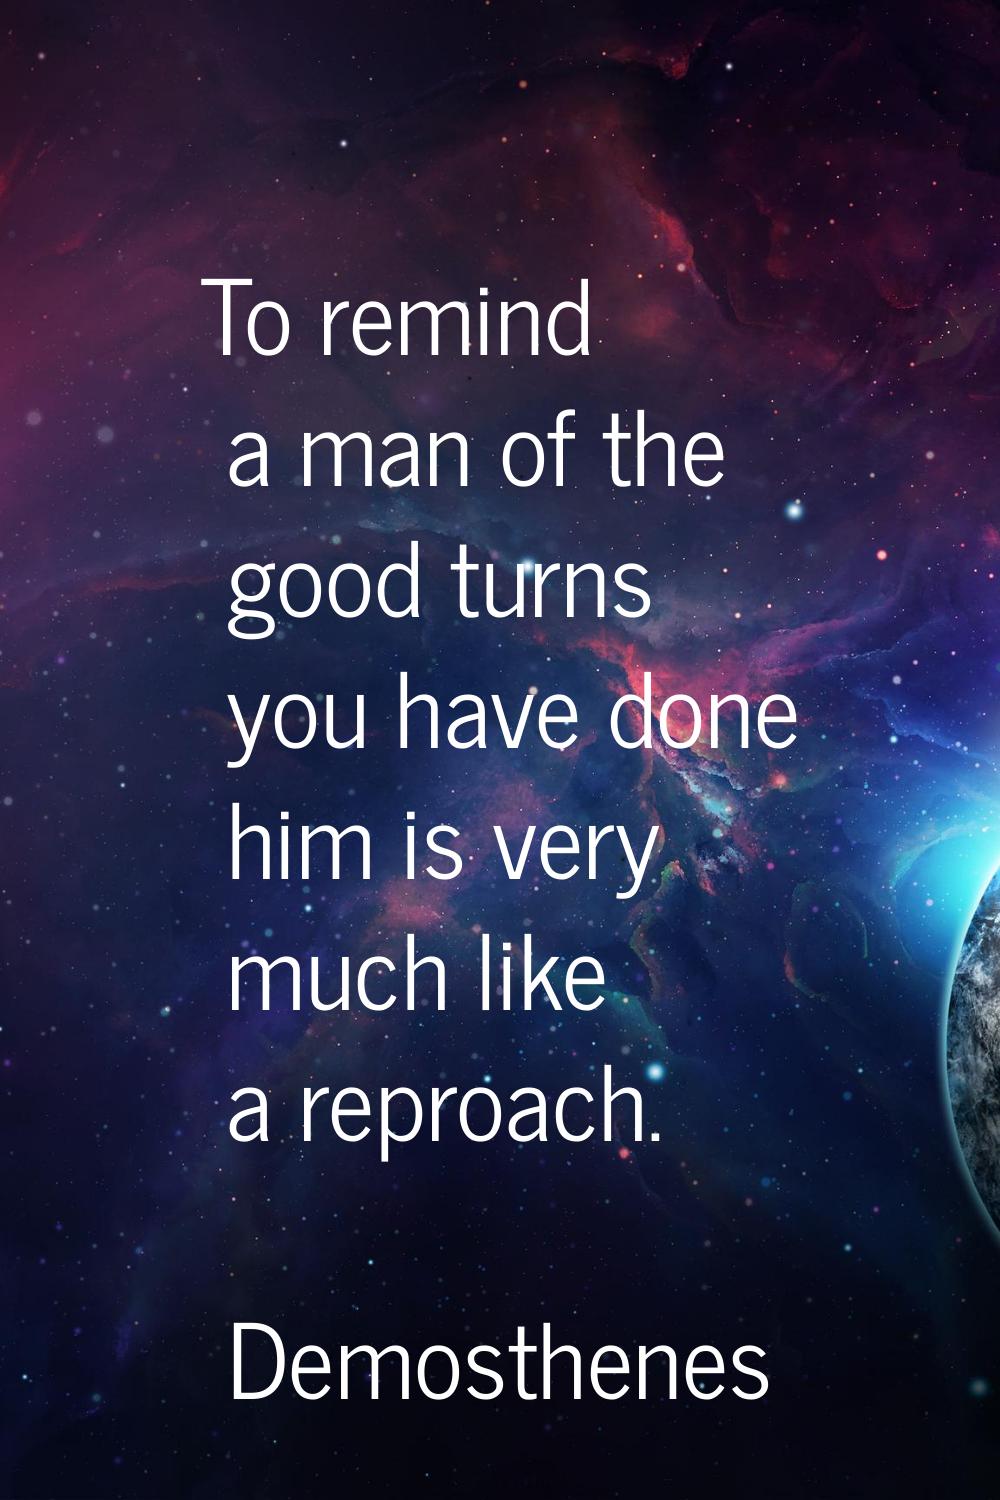 To remind a man of the good turns you have done him is very much like a reproach.